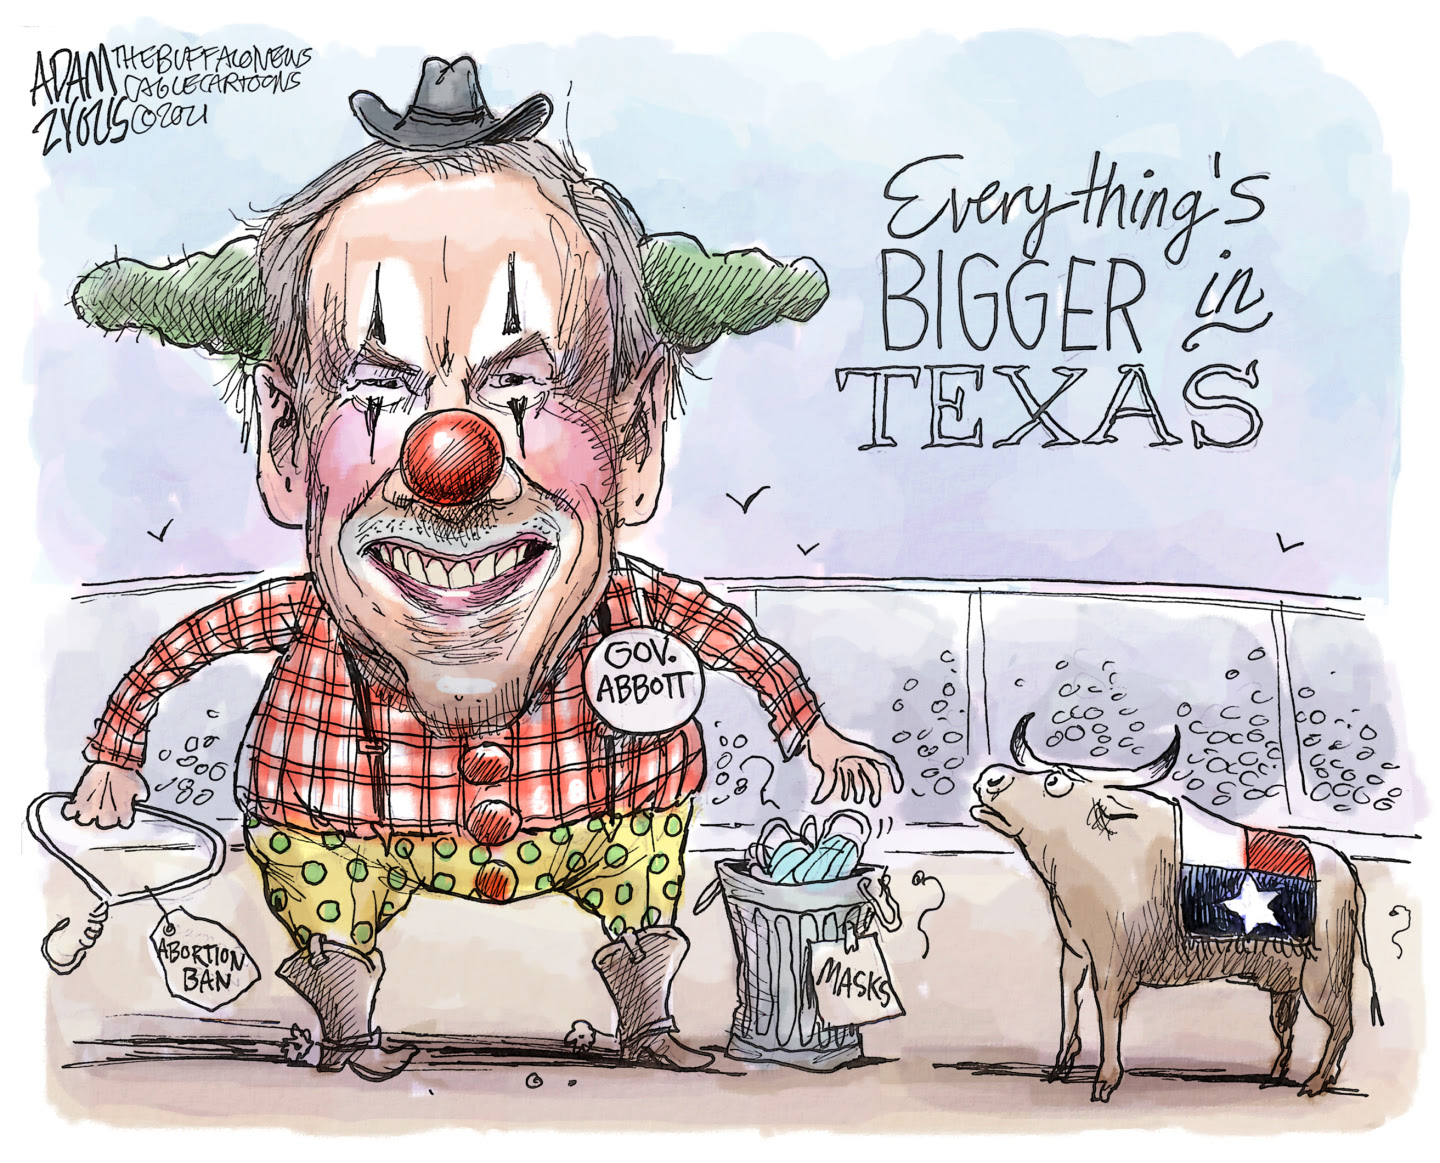 Greg Abbott is a Texas sized clown ignoring COVID dangers while banning abortions and pushing voter suppression